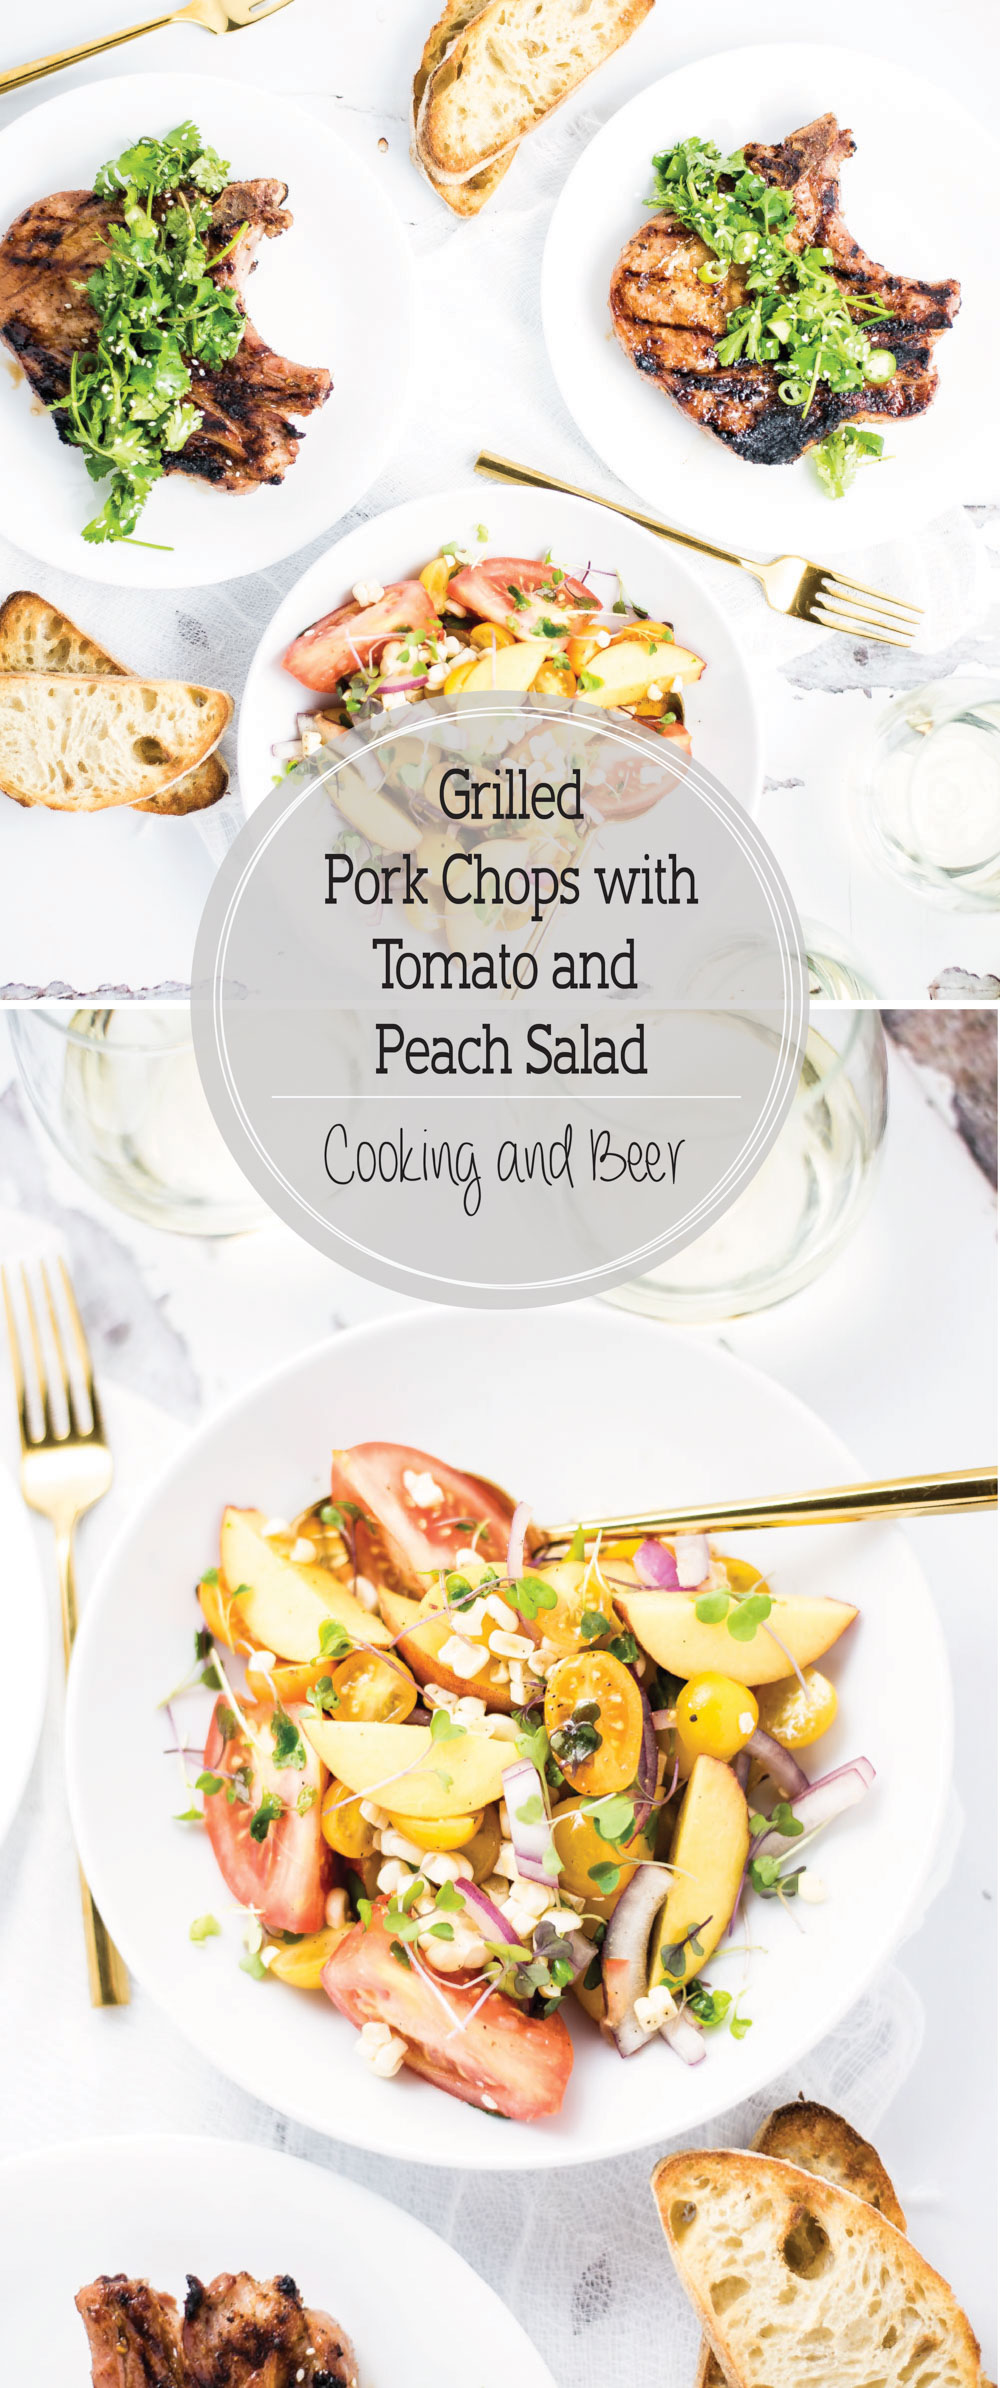 Grilled Pork Chops with Tomato and Peach Salad is the perfect summertime weeknight recipe loaded with bright flavors and textures!